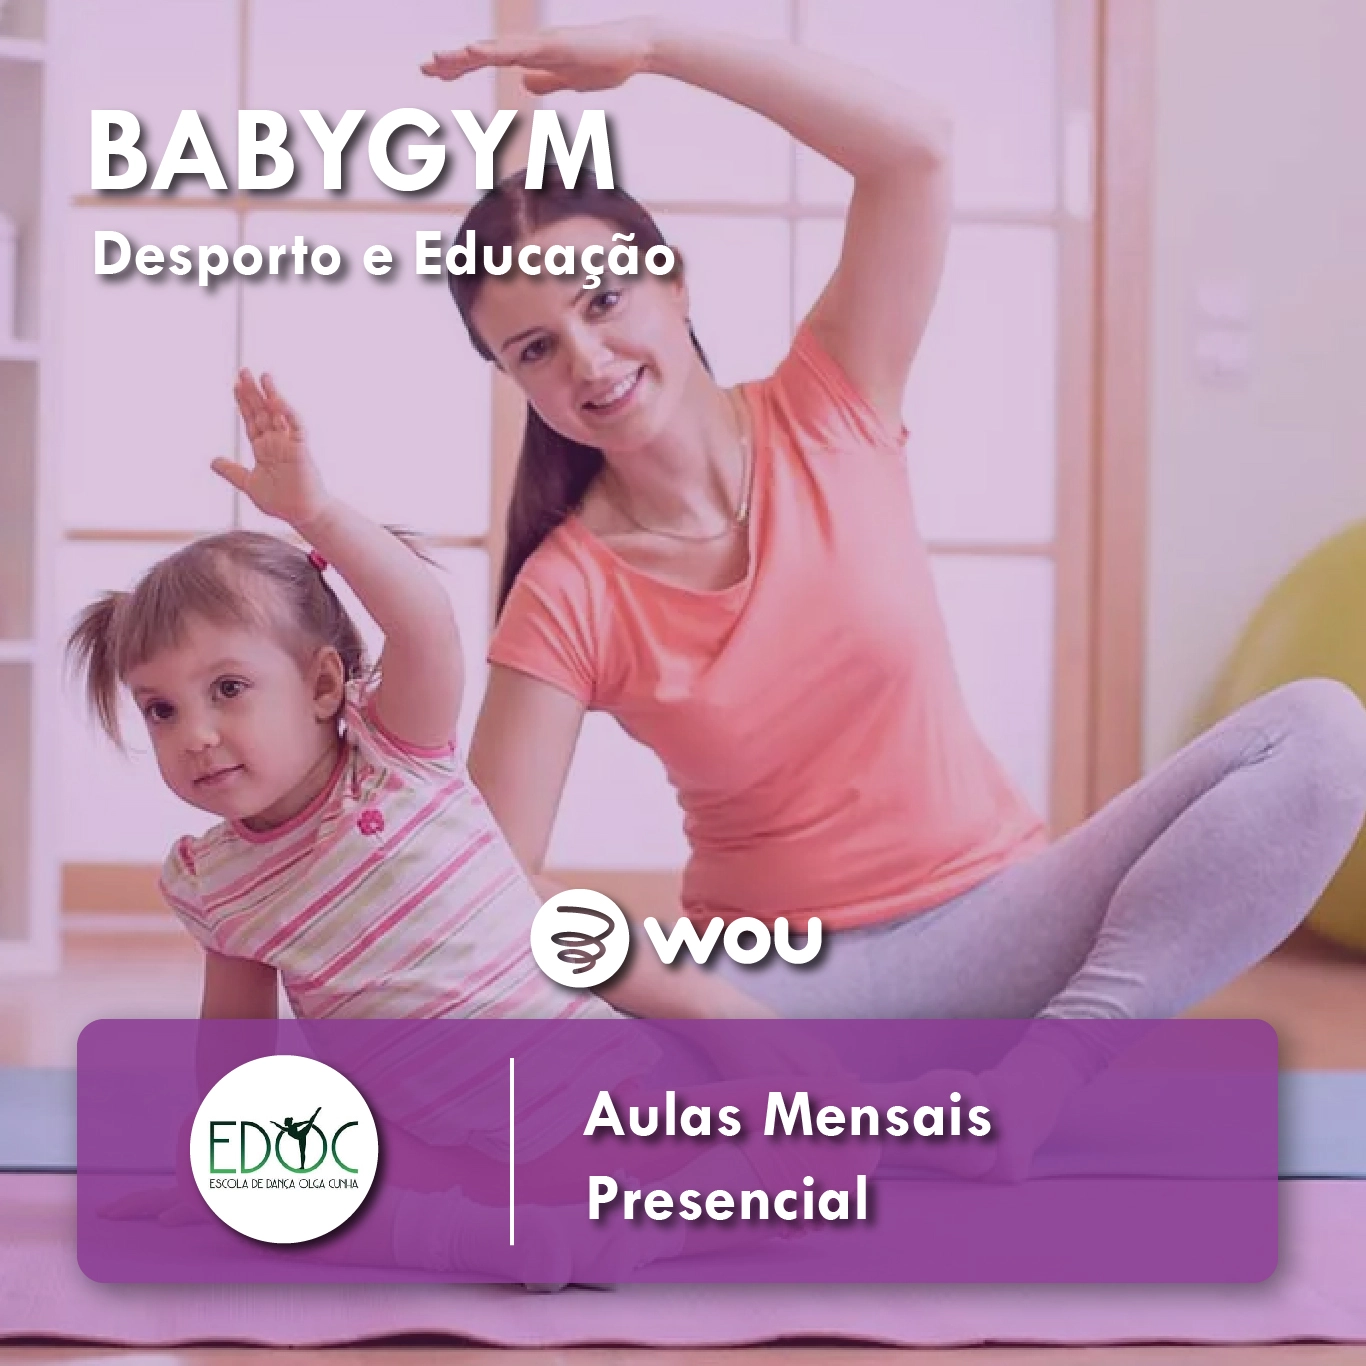 Babygym in Barcelos